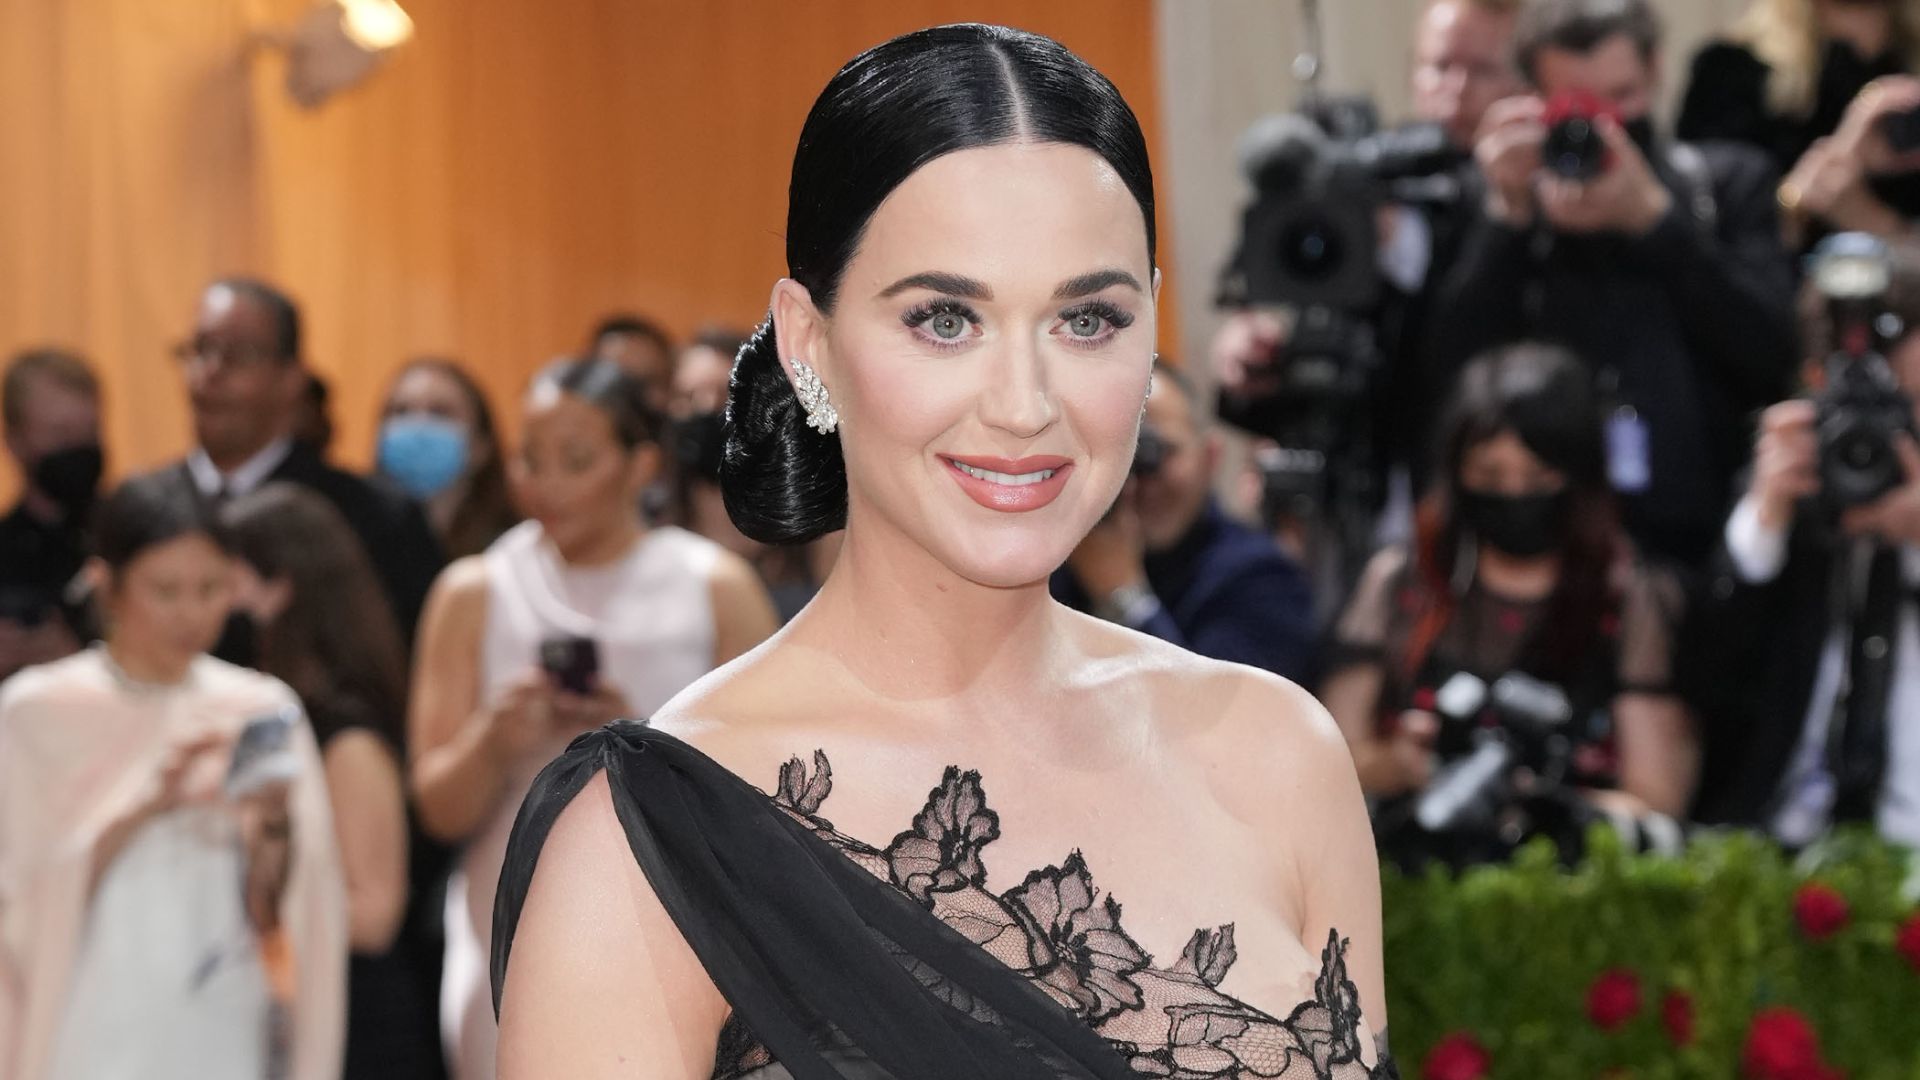 Katy Perry sold her catalog for $225 million! - OiCanadian